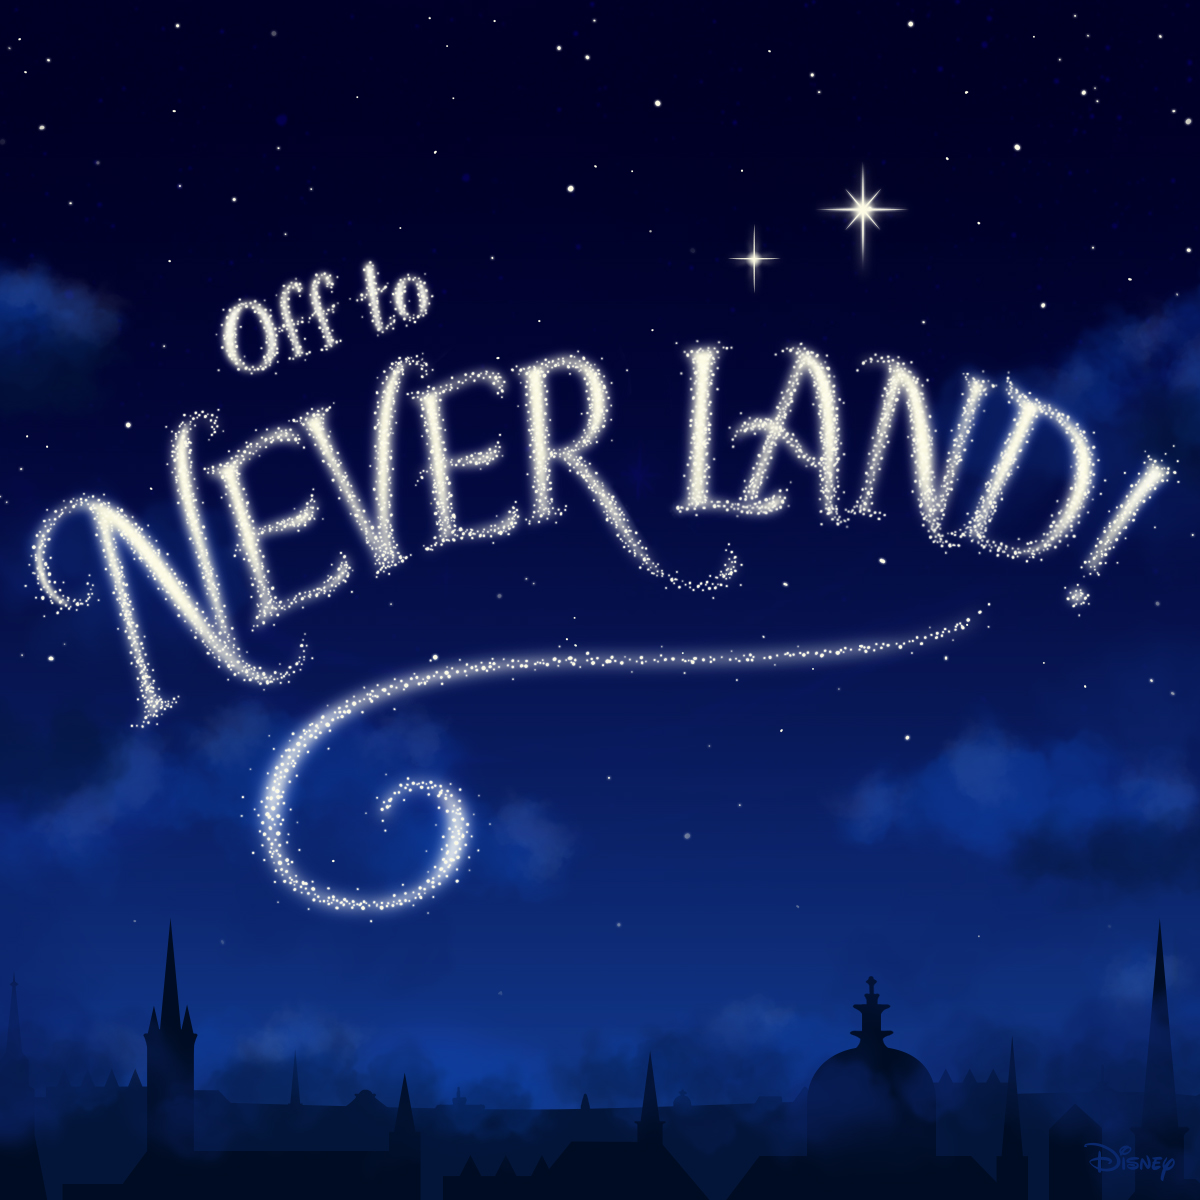 di_weekly_peterpan_never_land_quote